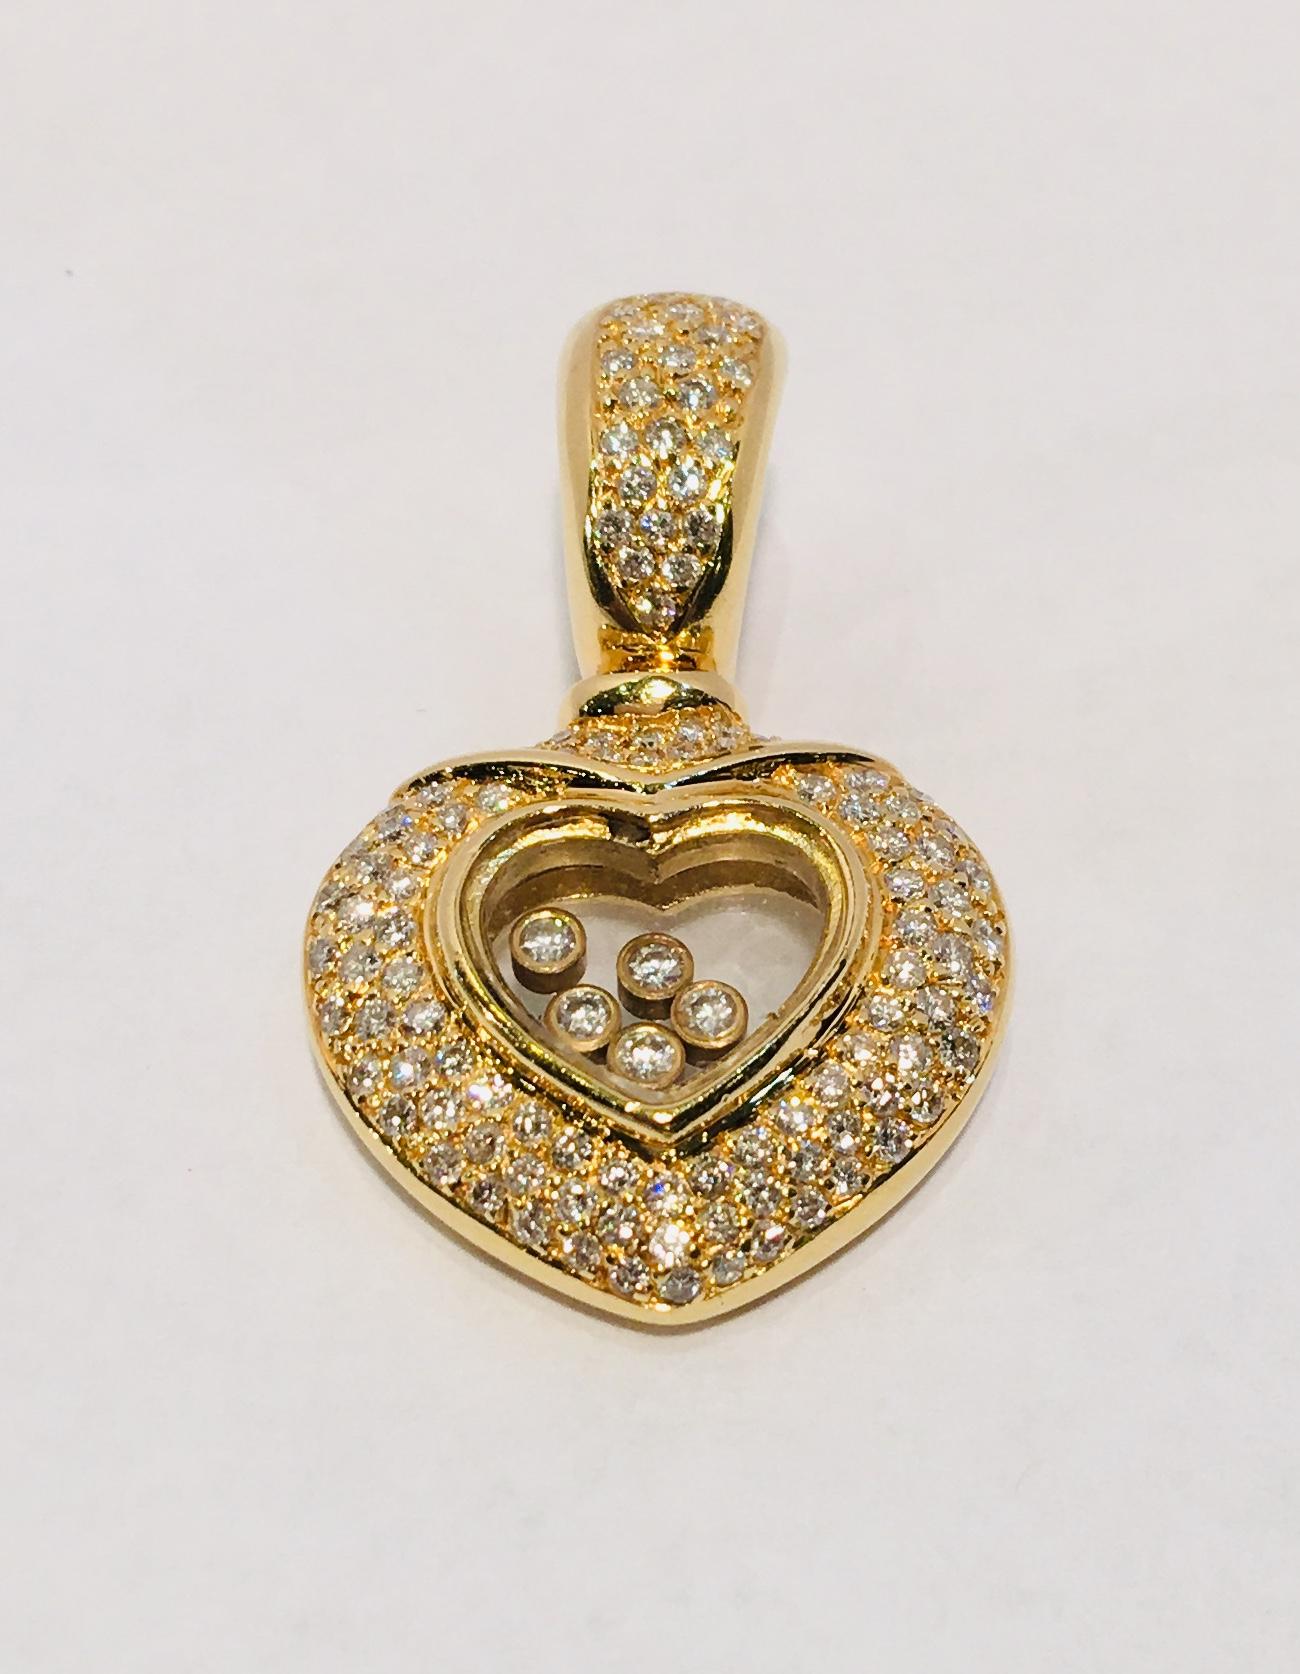 Heart-shaped, 18 karat yellow gold, diamond pave enhancer pendant features 5 bezel set round brilliant diamonds, encased in clear crystal, which float freely within the hearts.  5 diamonds measure 1.8 mm and weigh approximately .125 carats.  111